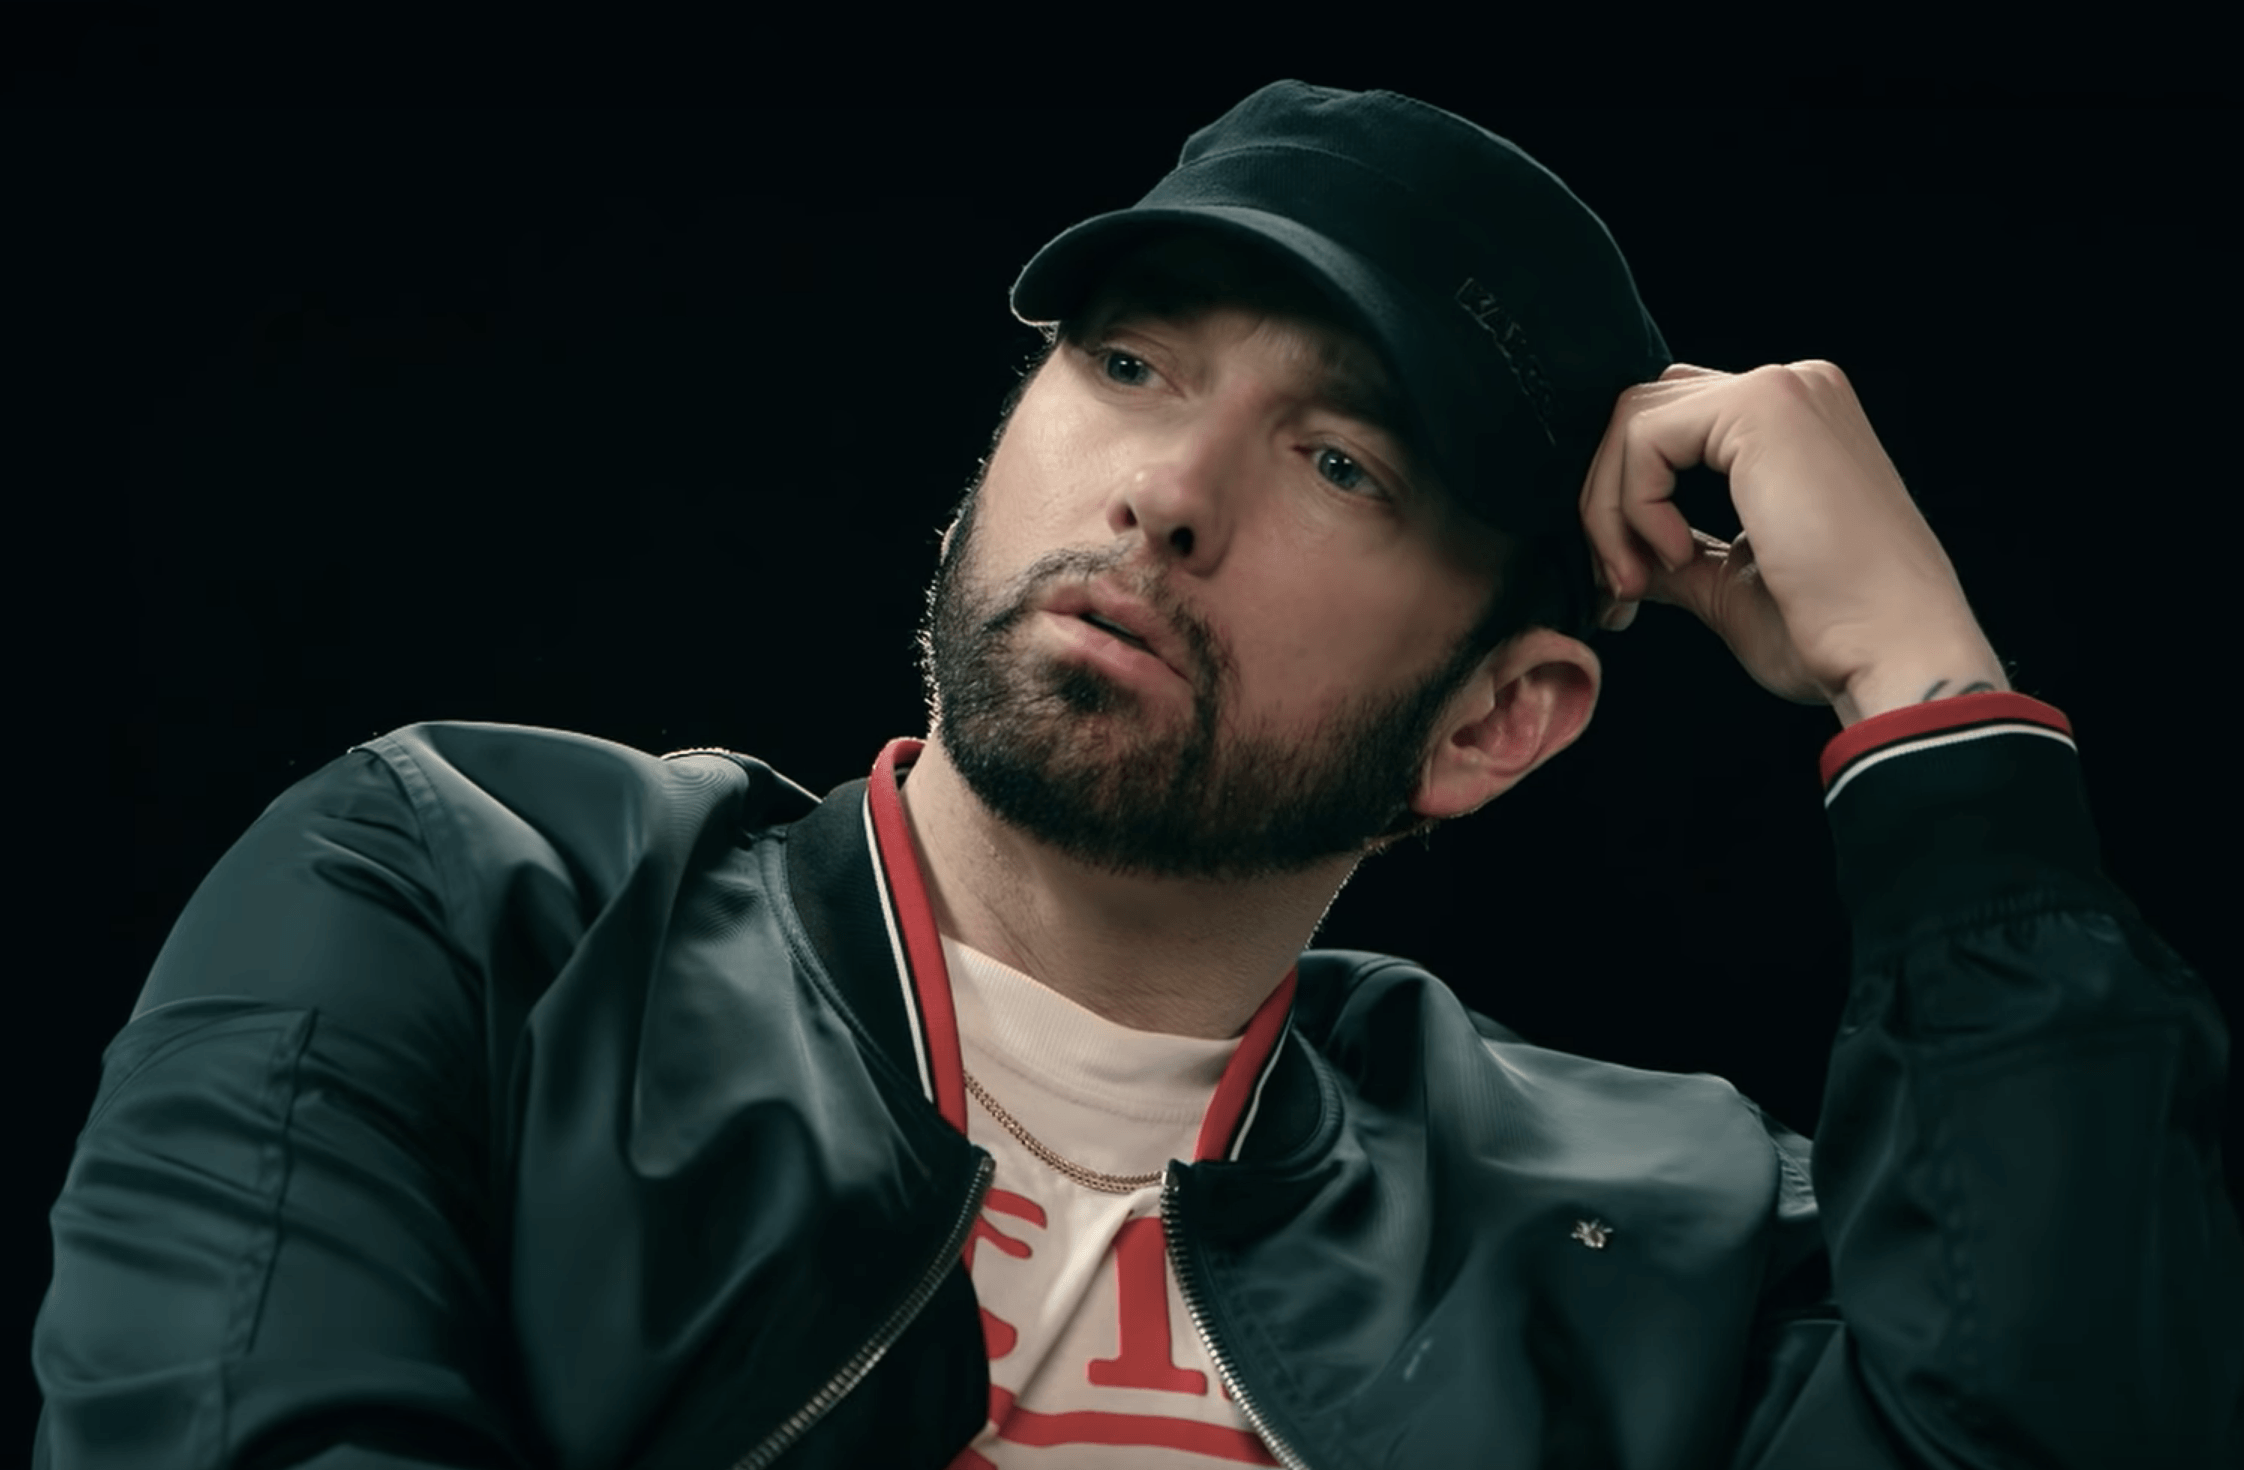 Documents reveal Eminem was actually visited